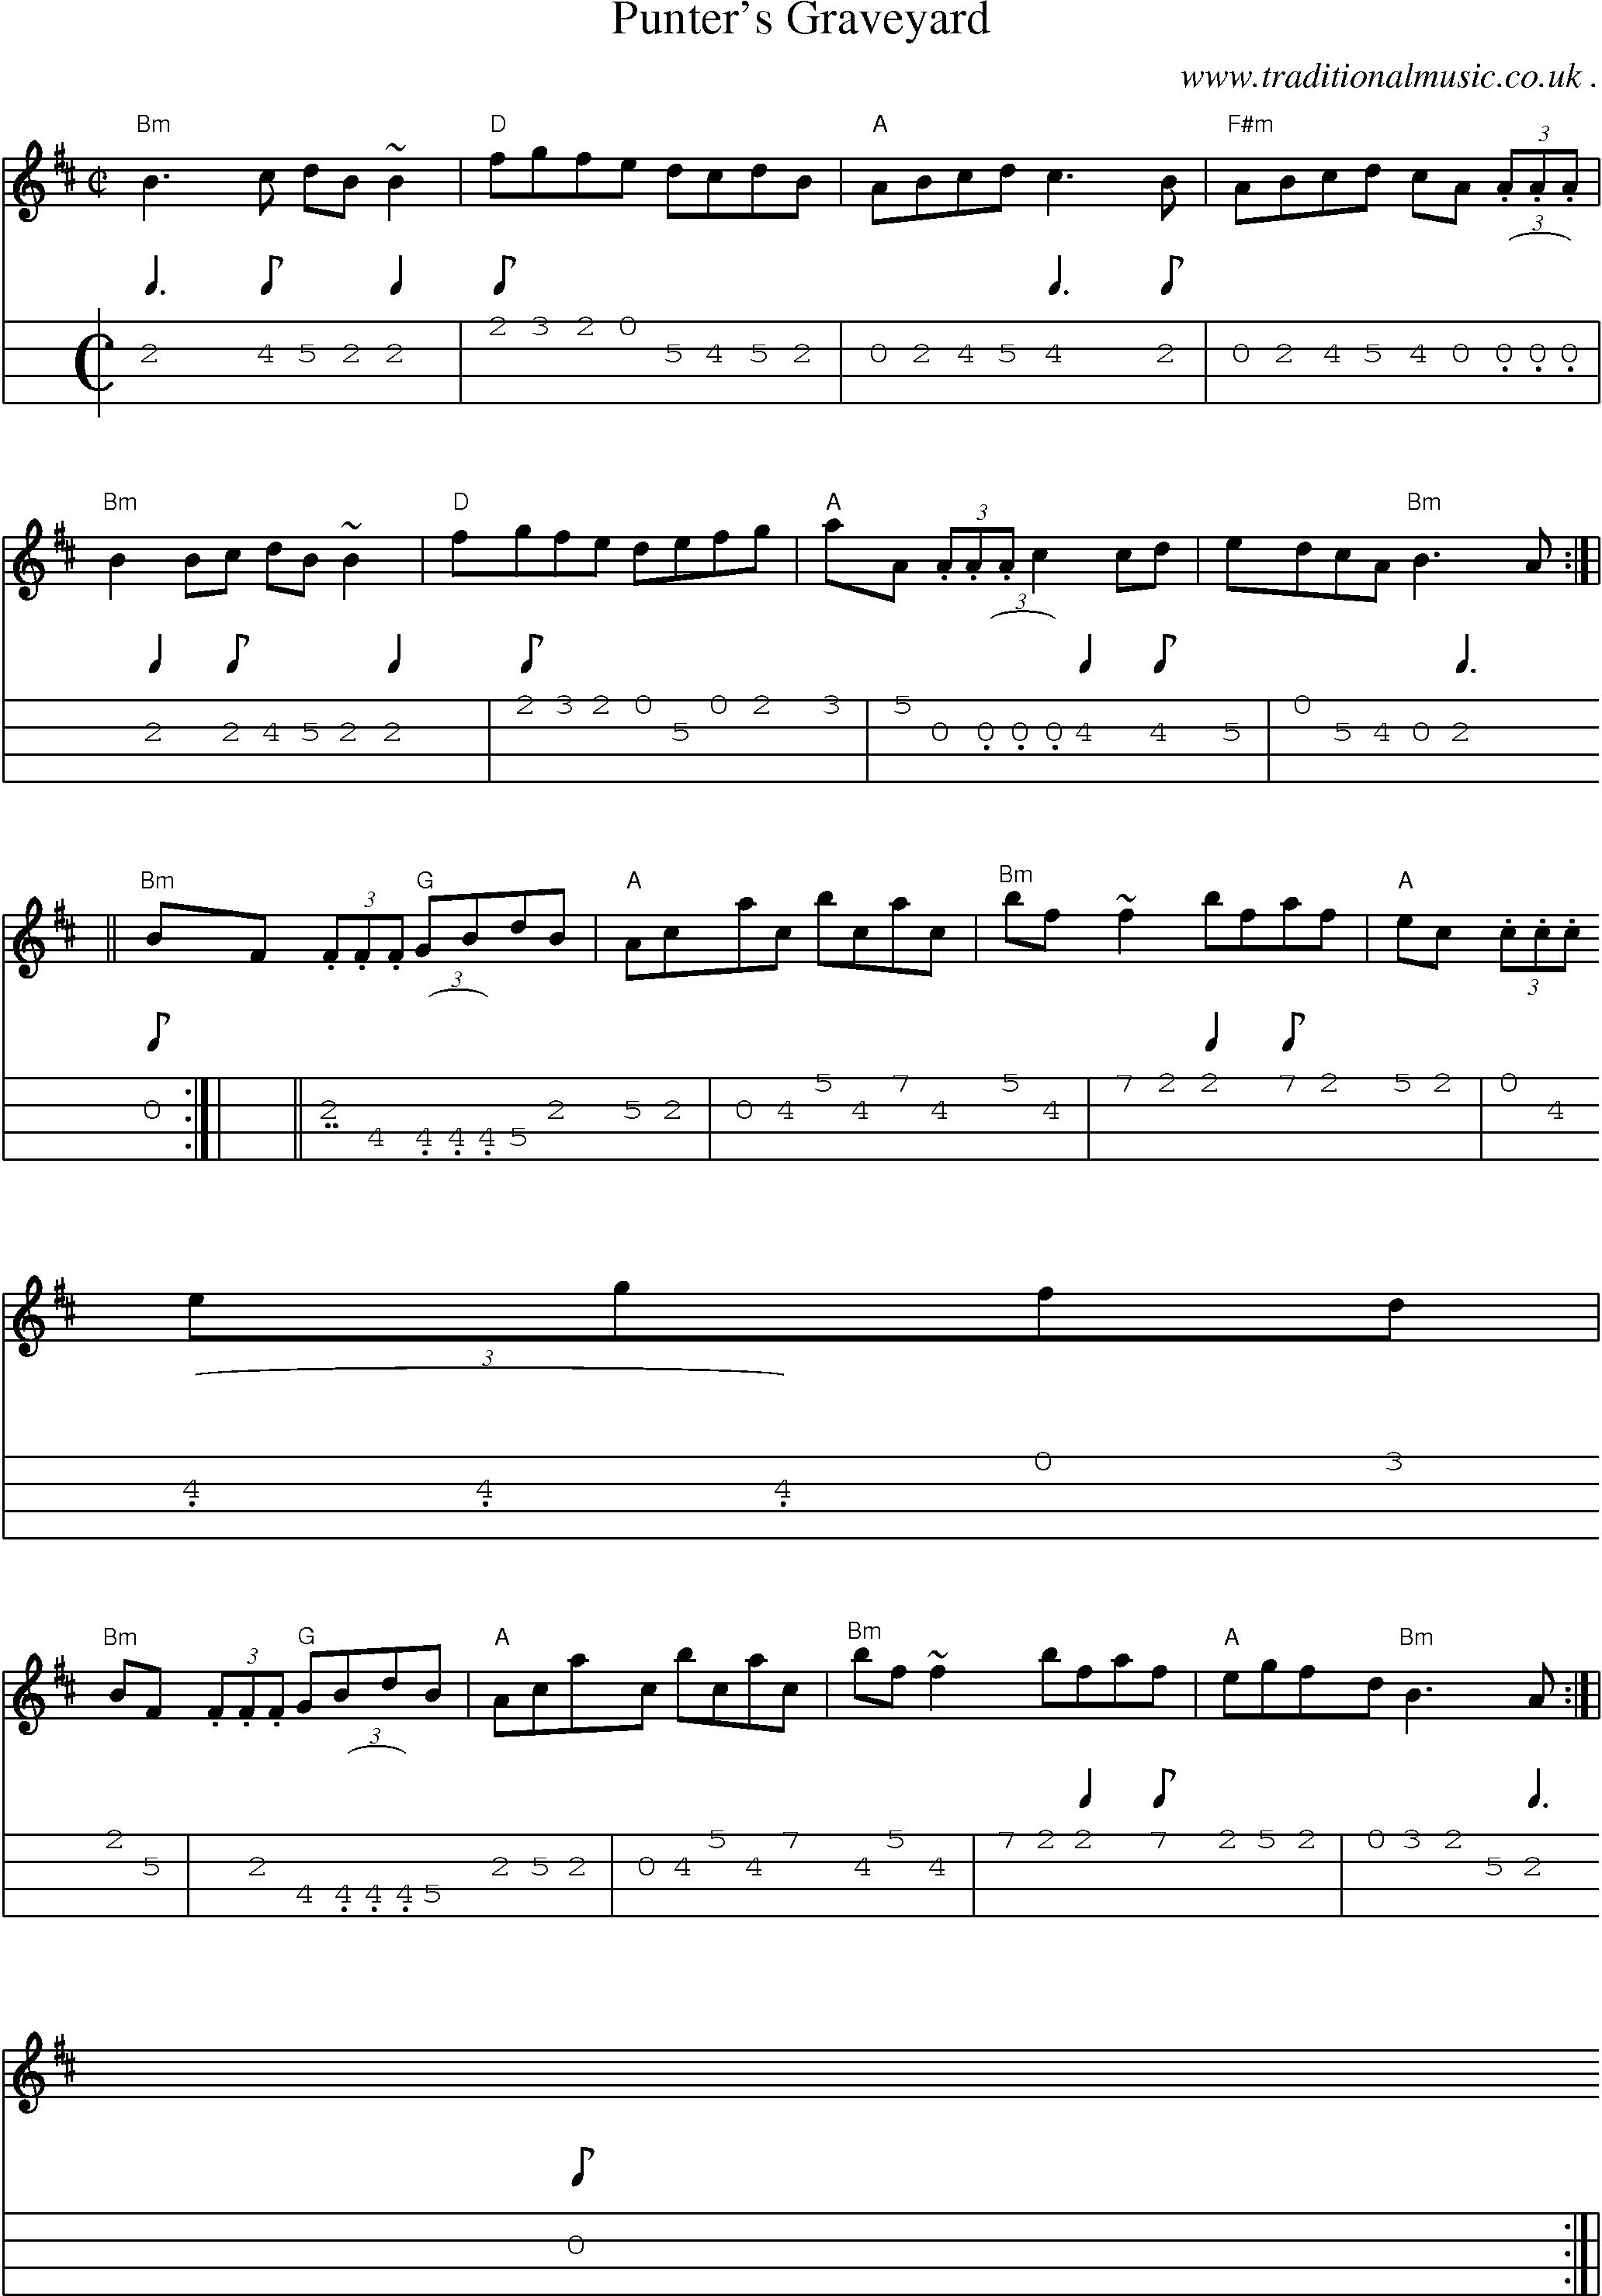 Sheet-music  score, Chords and Mandolin Tabs for Punters Graveyard